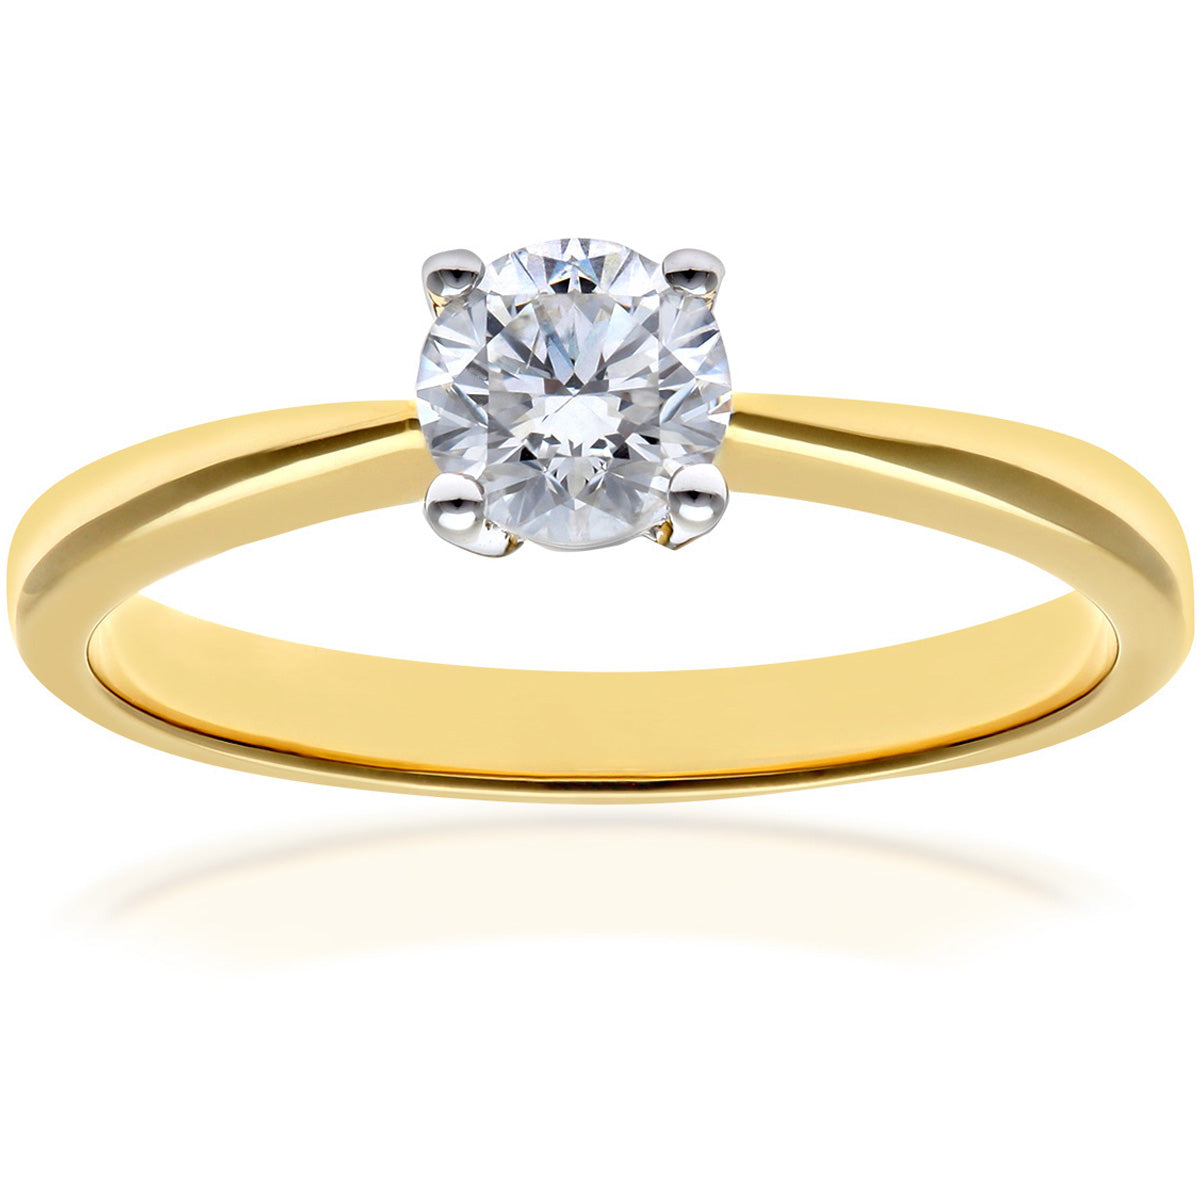 18ct Gold  Round 1/2ct Diamond 4 Claw Solitaire Engagement Ring - PR0AXL4307Y18HSI